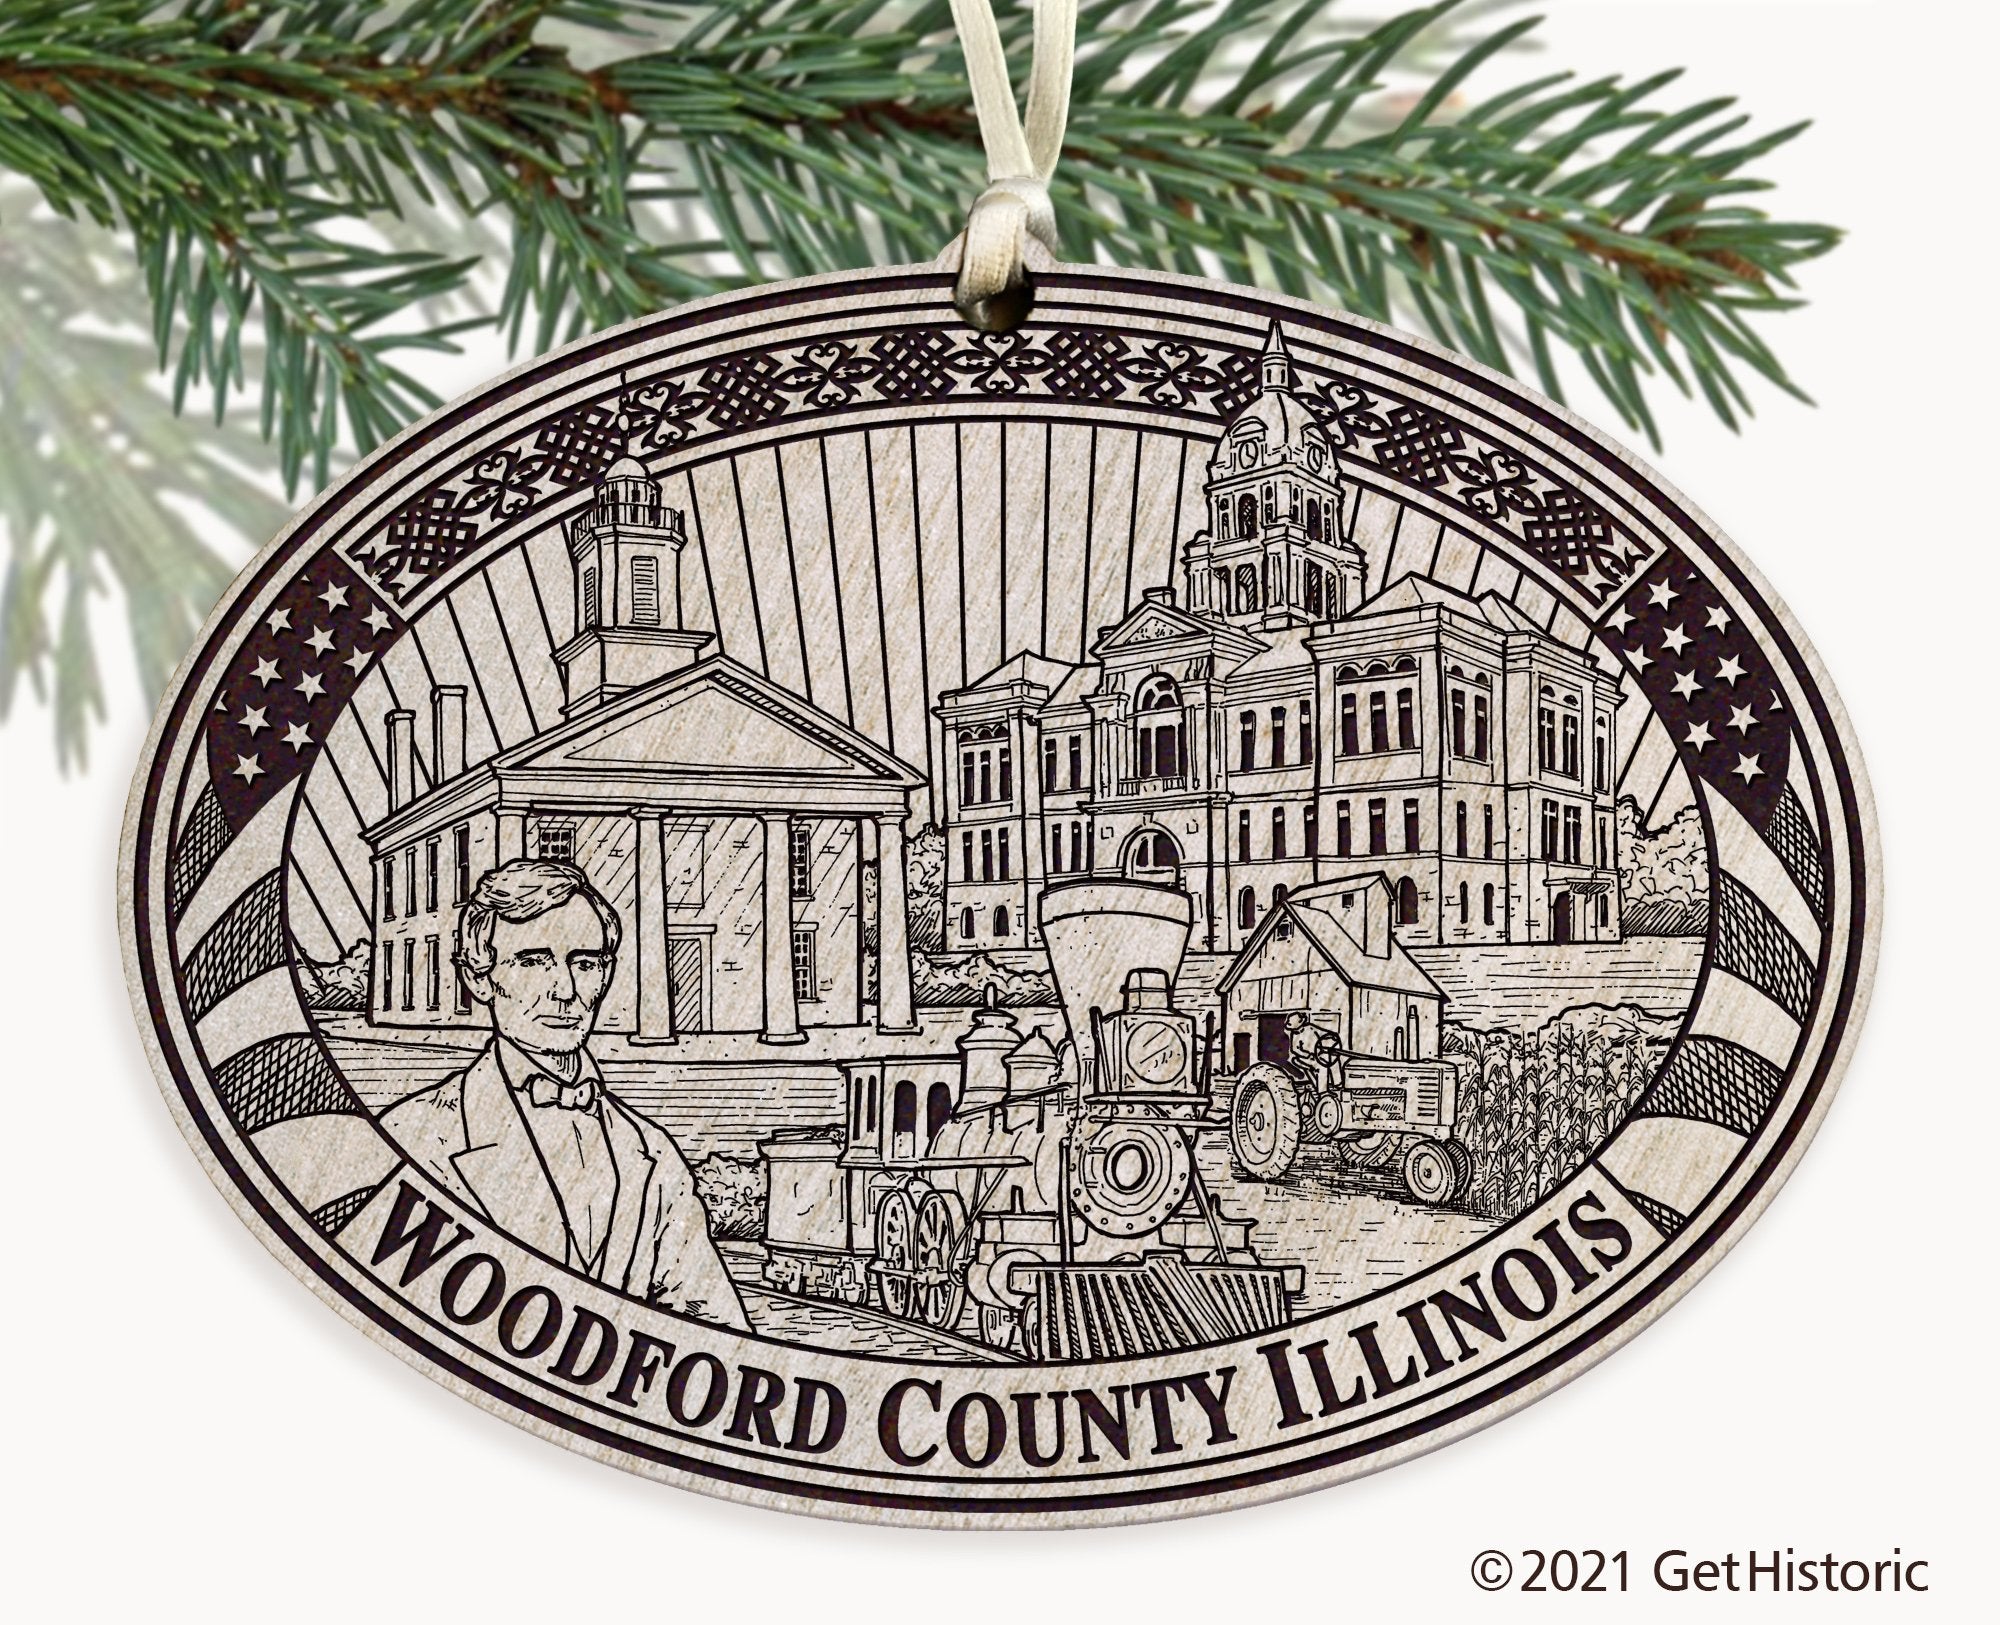 Woodford County Illinois Engraved Ornament